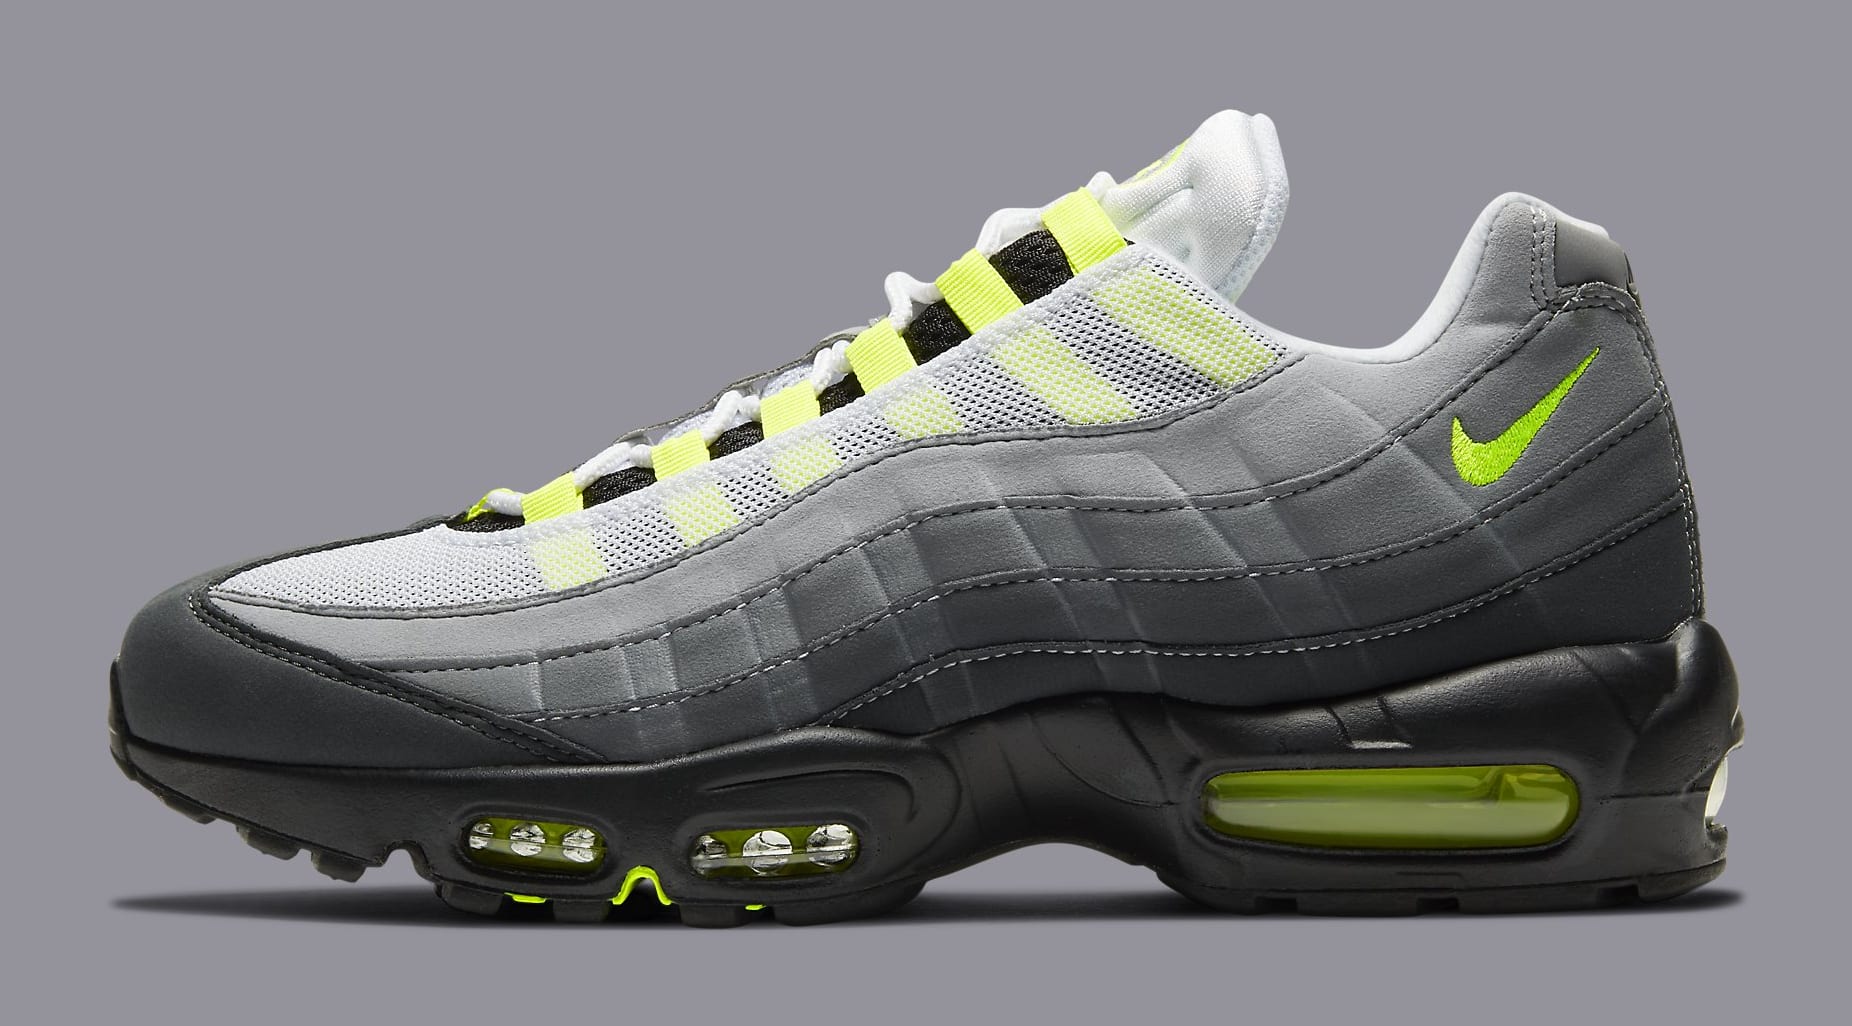 Yet at This Year's 'Neon' Air 95s |